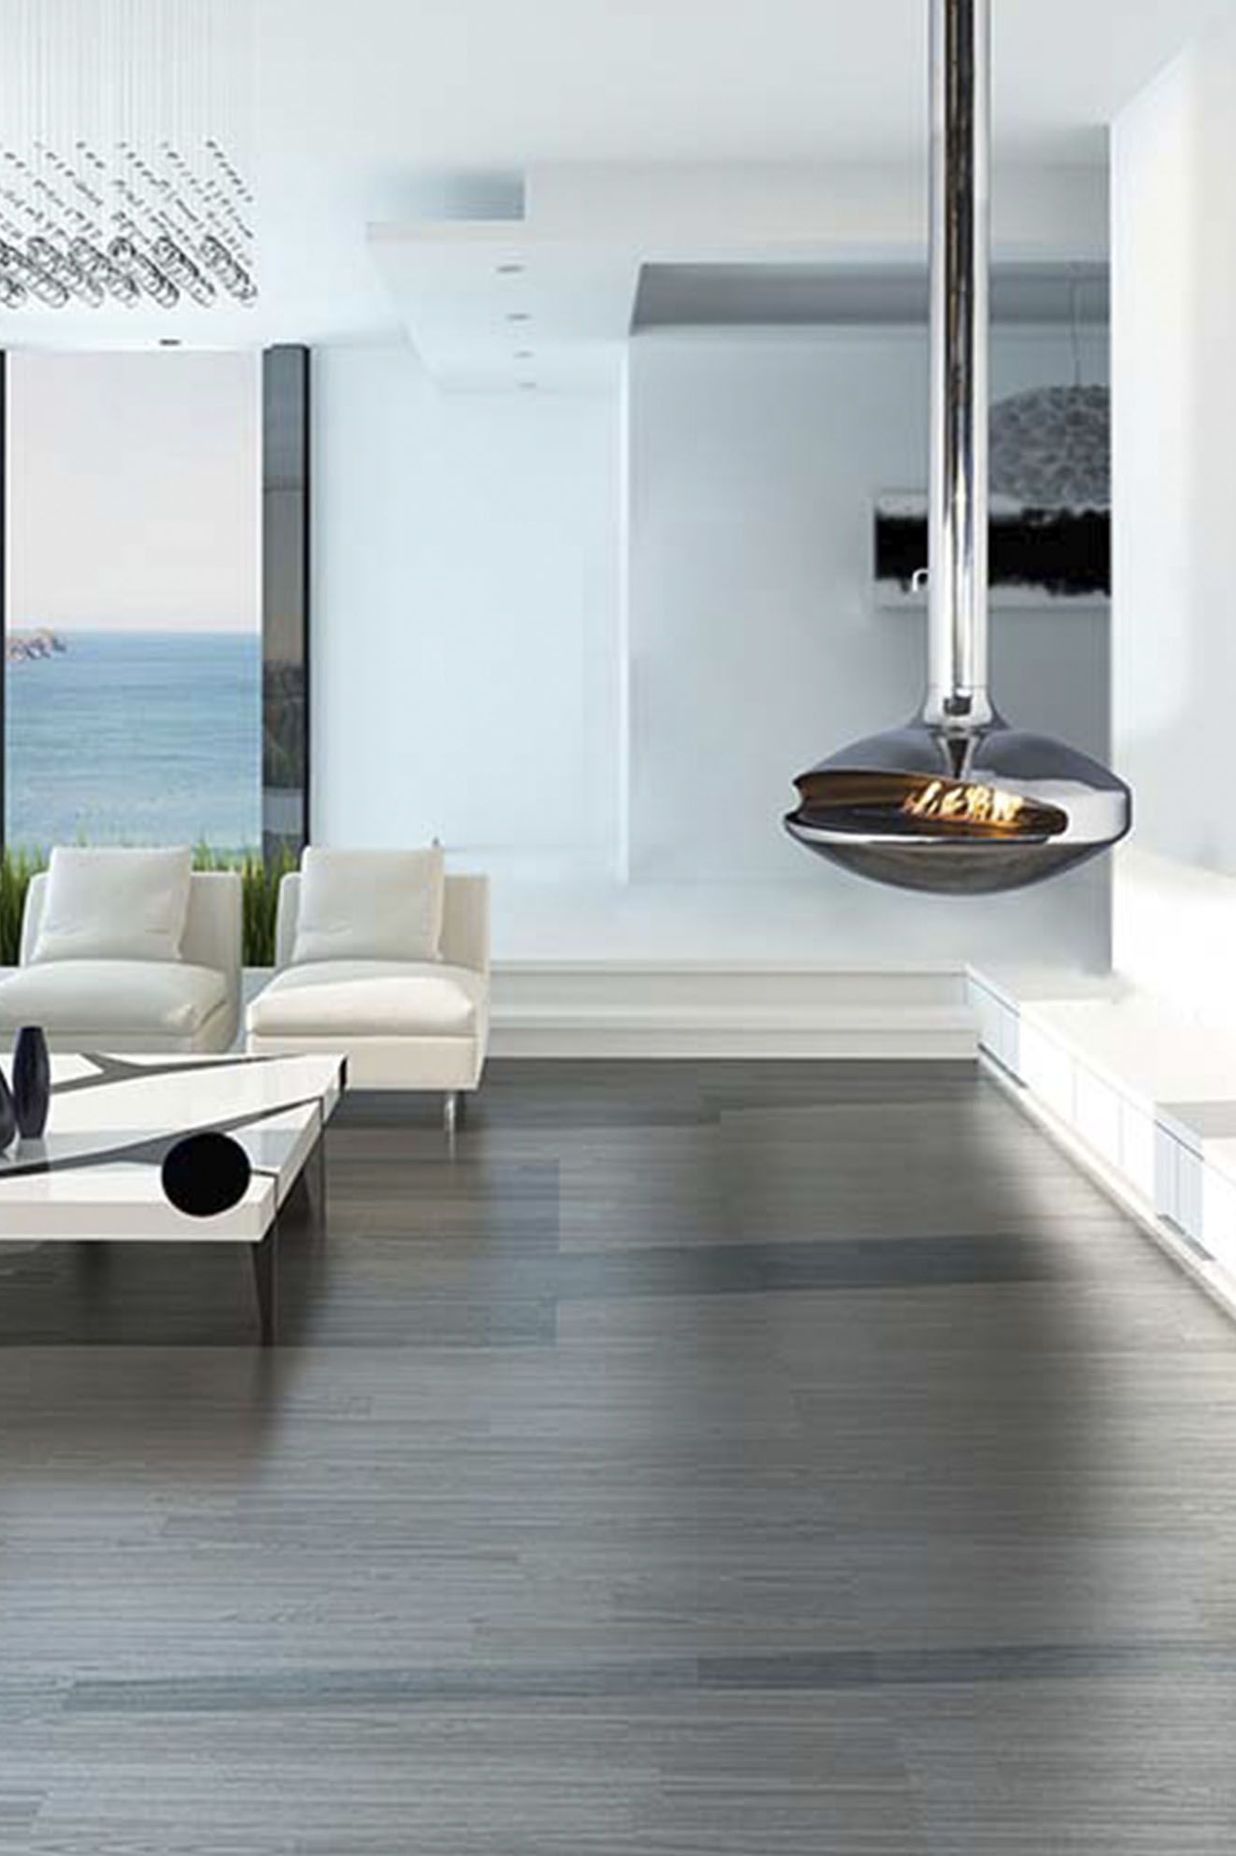 The luminous depth of this marine grade Stainless Steel Aurora Aether fireplace is alluring.